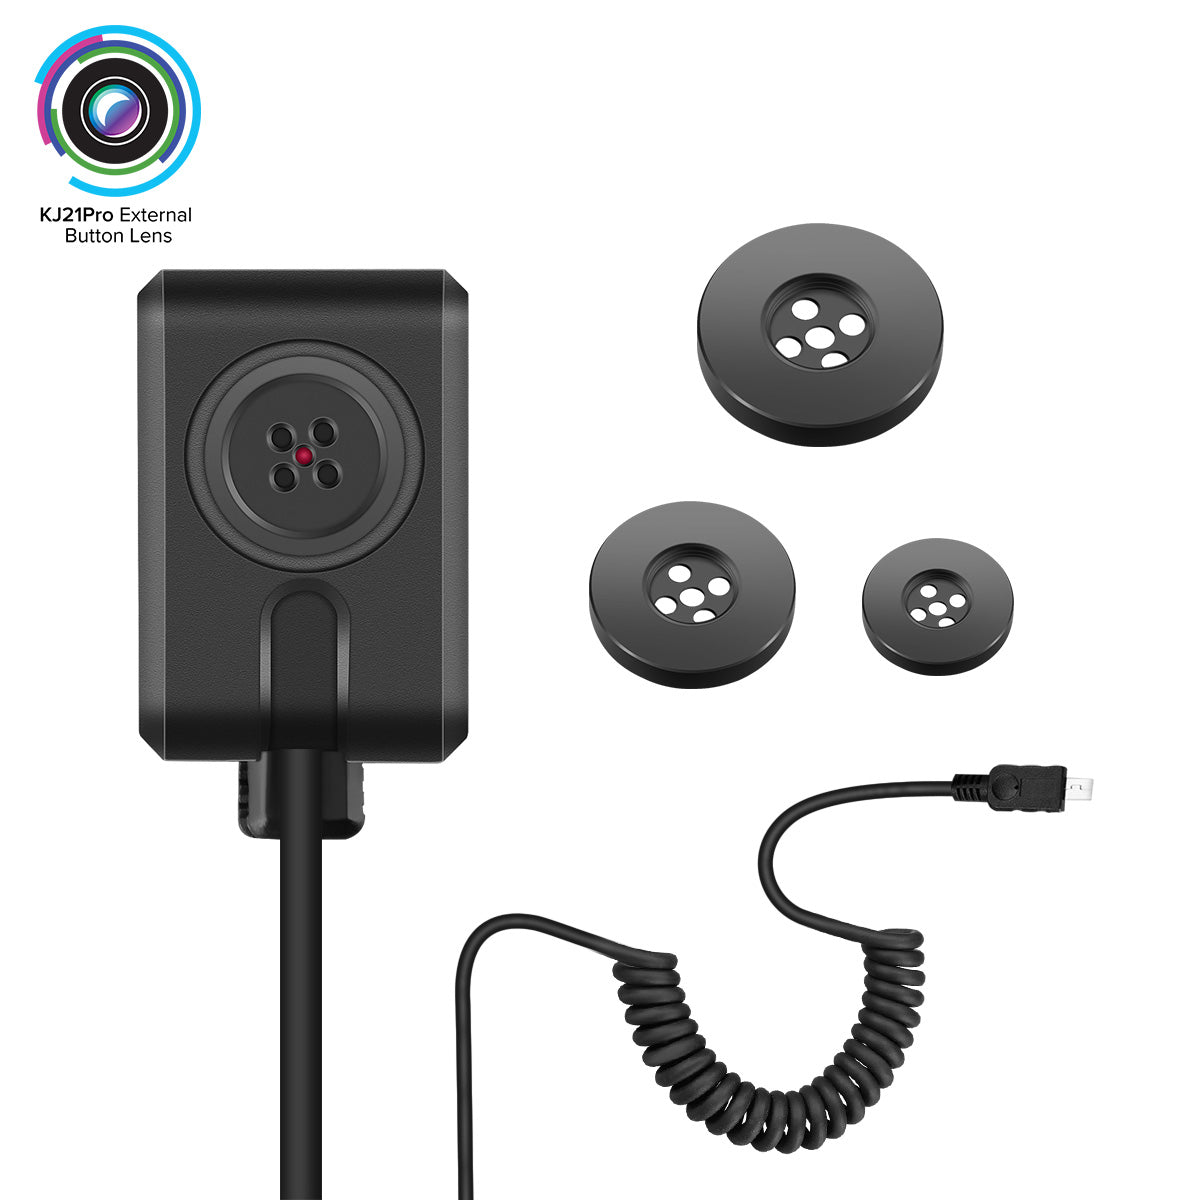 BOBLOV 720P external camera accessory compatible exclusively with KJ21 Pro model